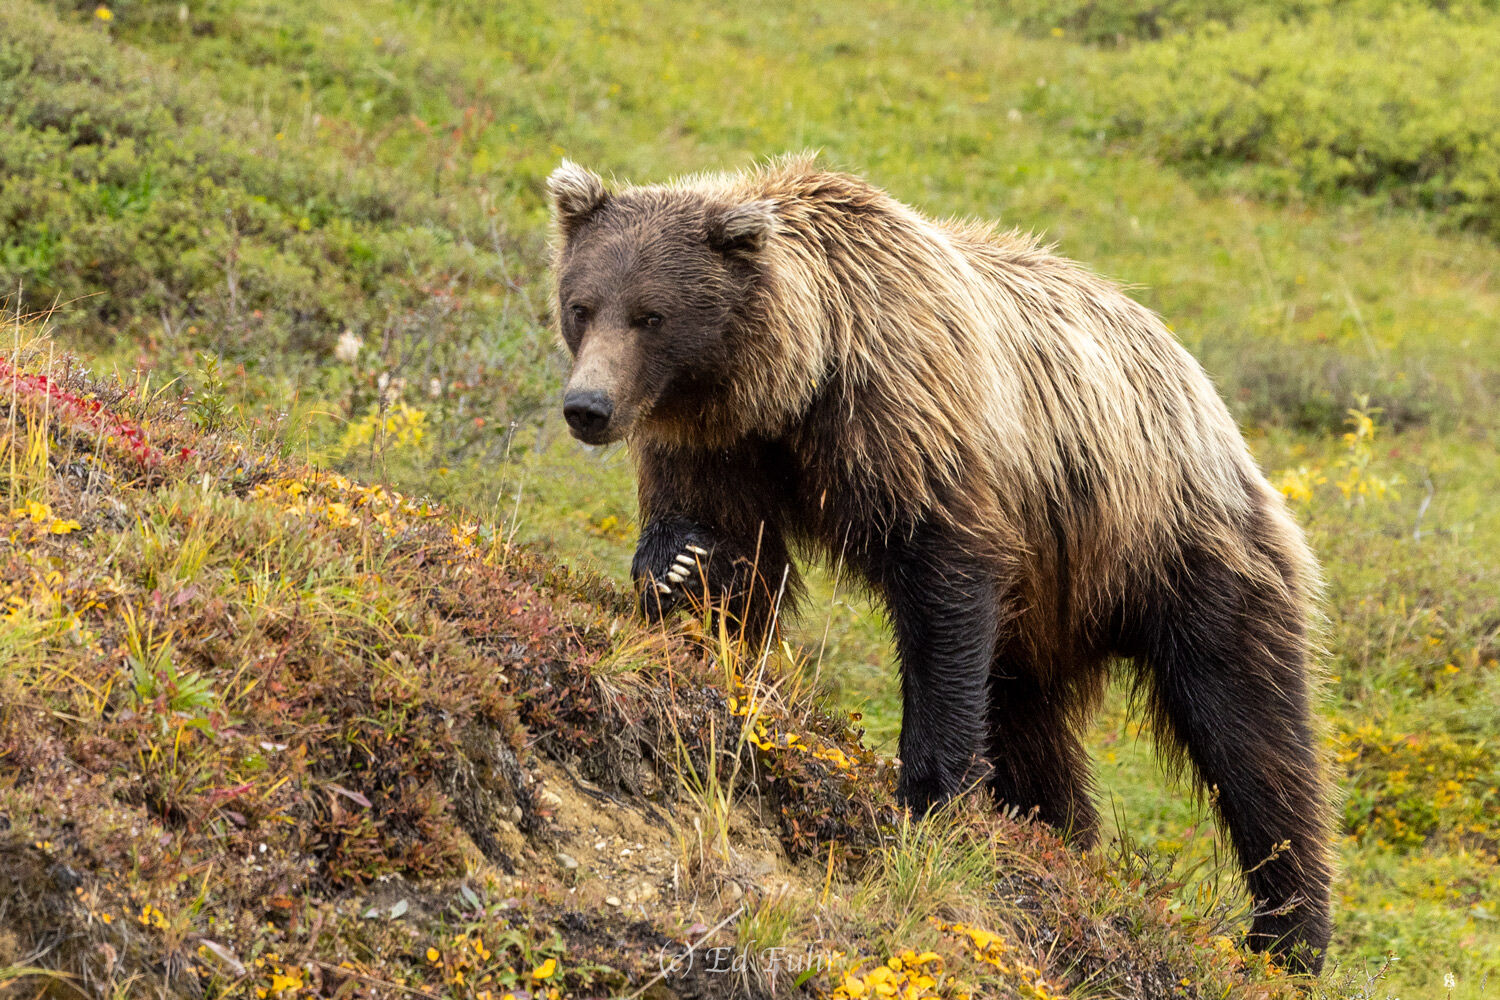 It is late fall and the search for food is relentless.   This large grizzly has been foraging on autumn's last berries and is...